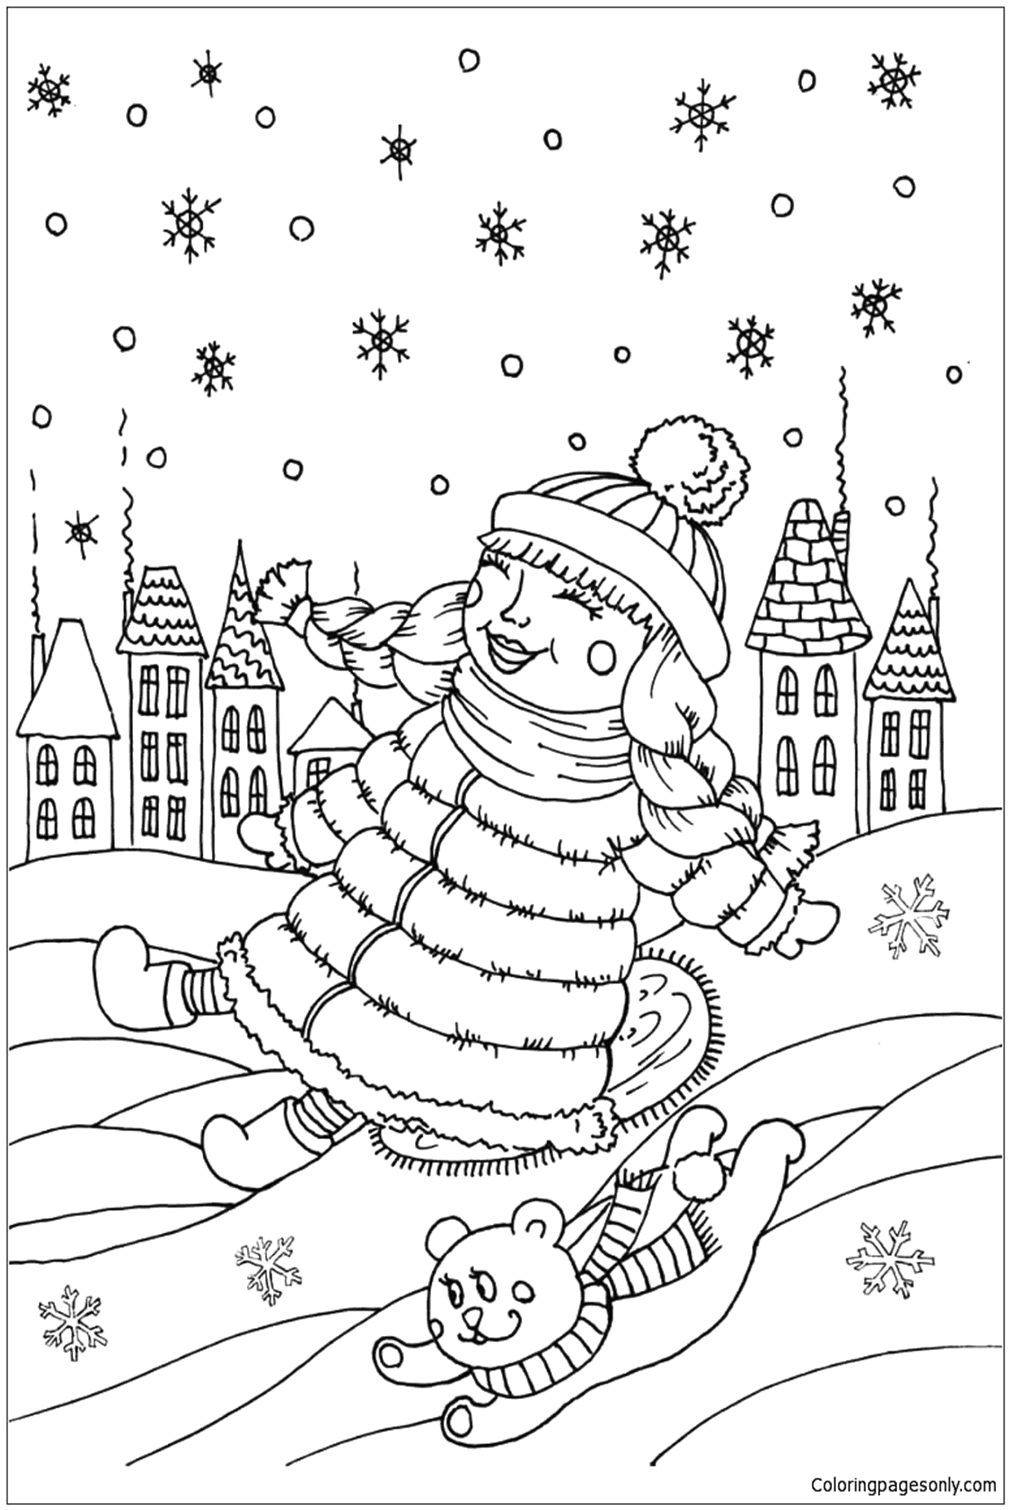 Peppy In January Coloring Pages